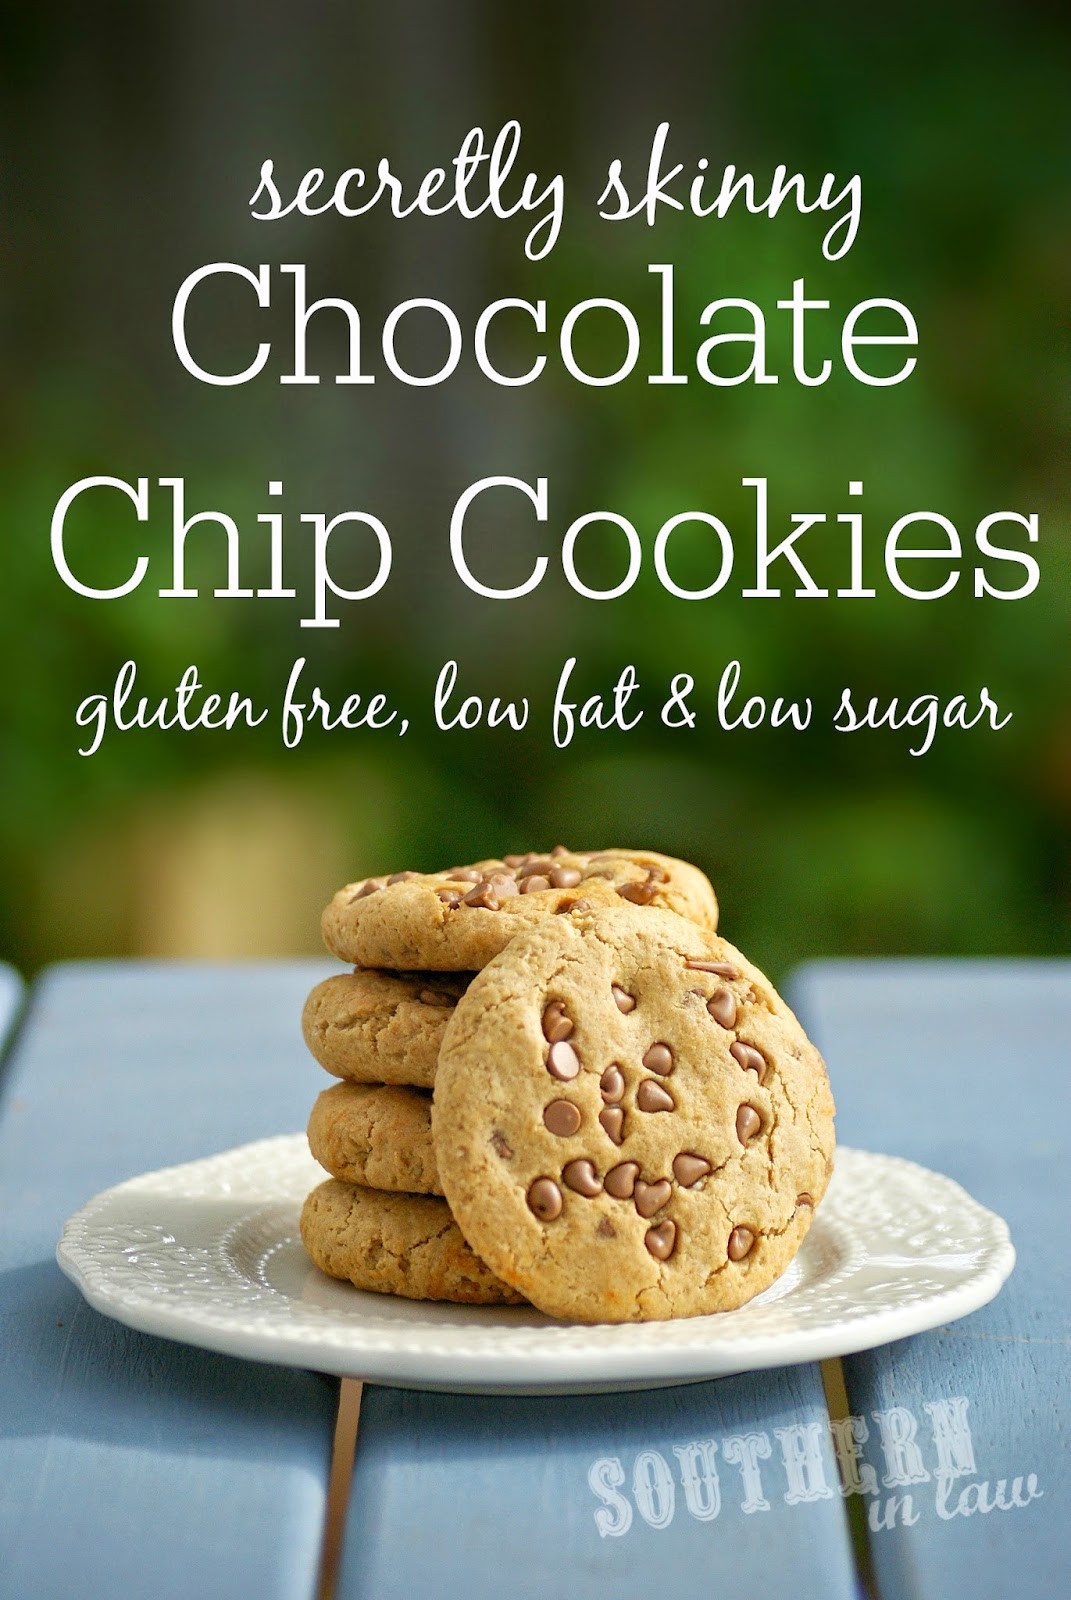 Low Fat Sugar Cookies
 Southern In Law Recipe Secretly Skinny Chocolate Chip